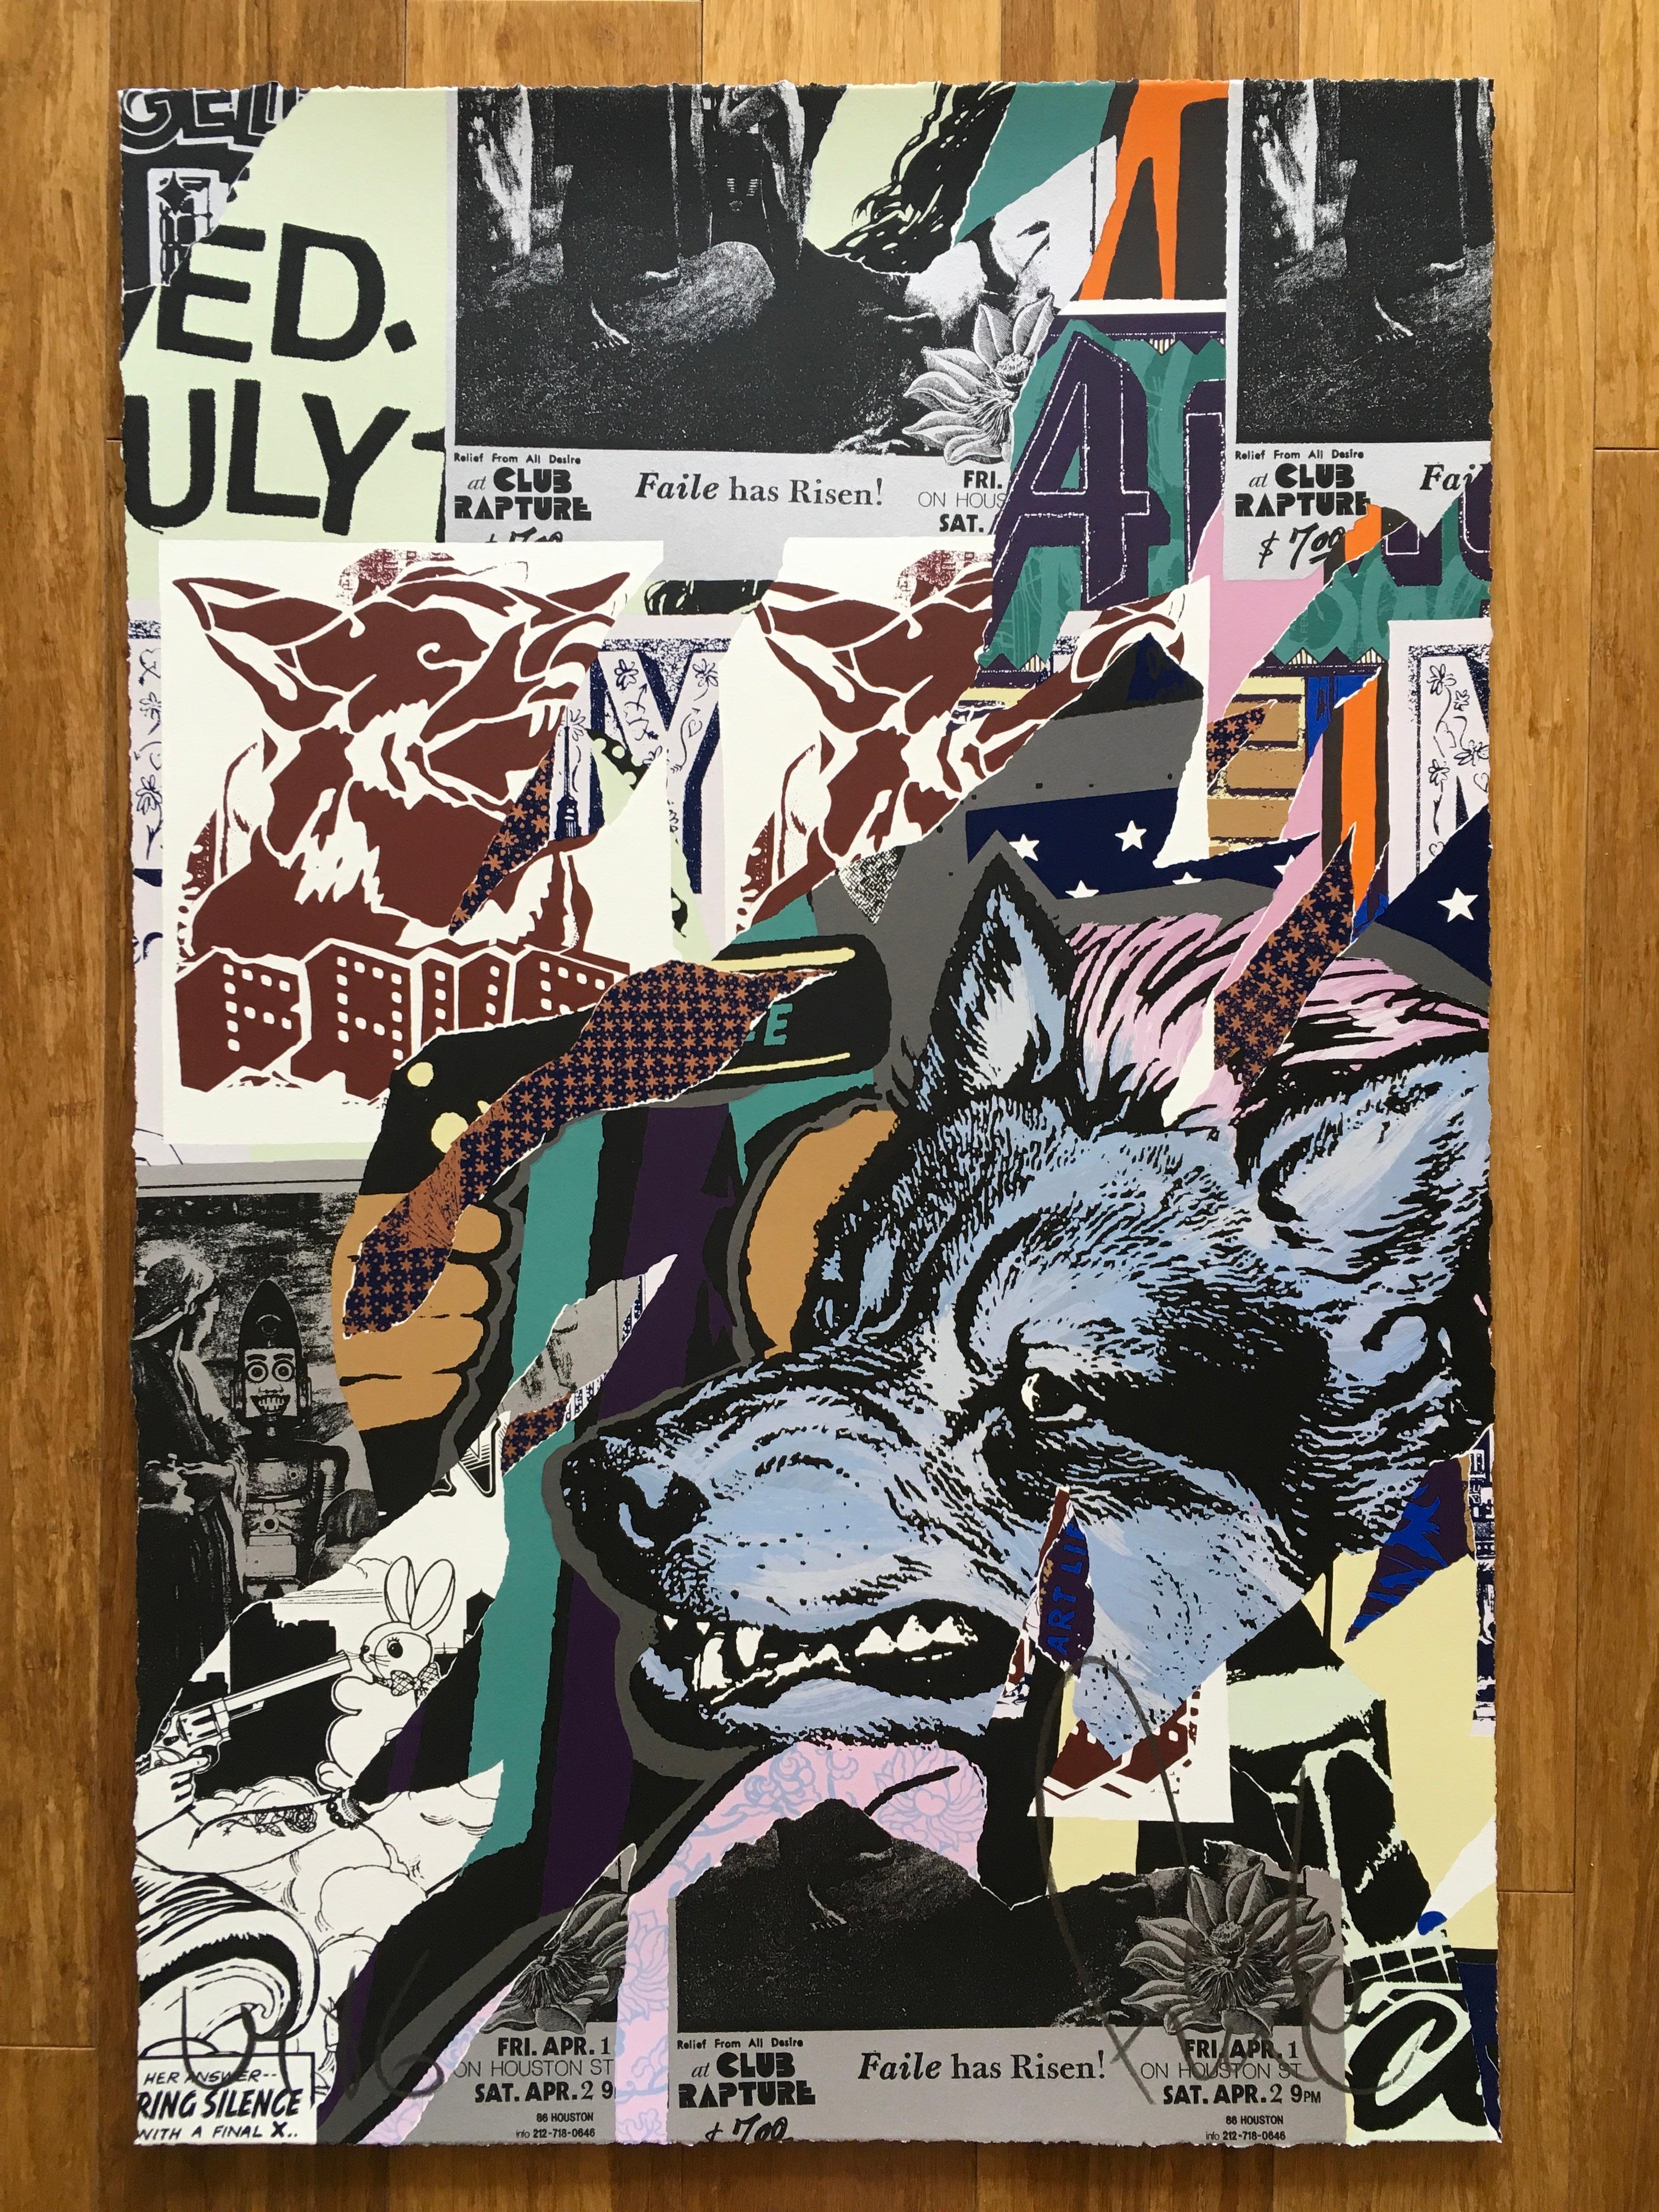 Faile Figurative Print - "Almost Rapture" 23 Color Silkscreen Print, Limited Edition, SSYM Series